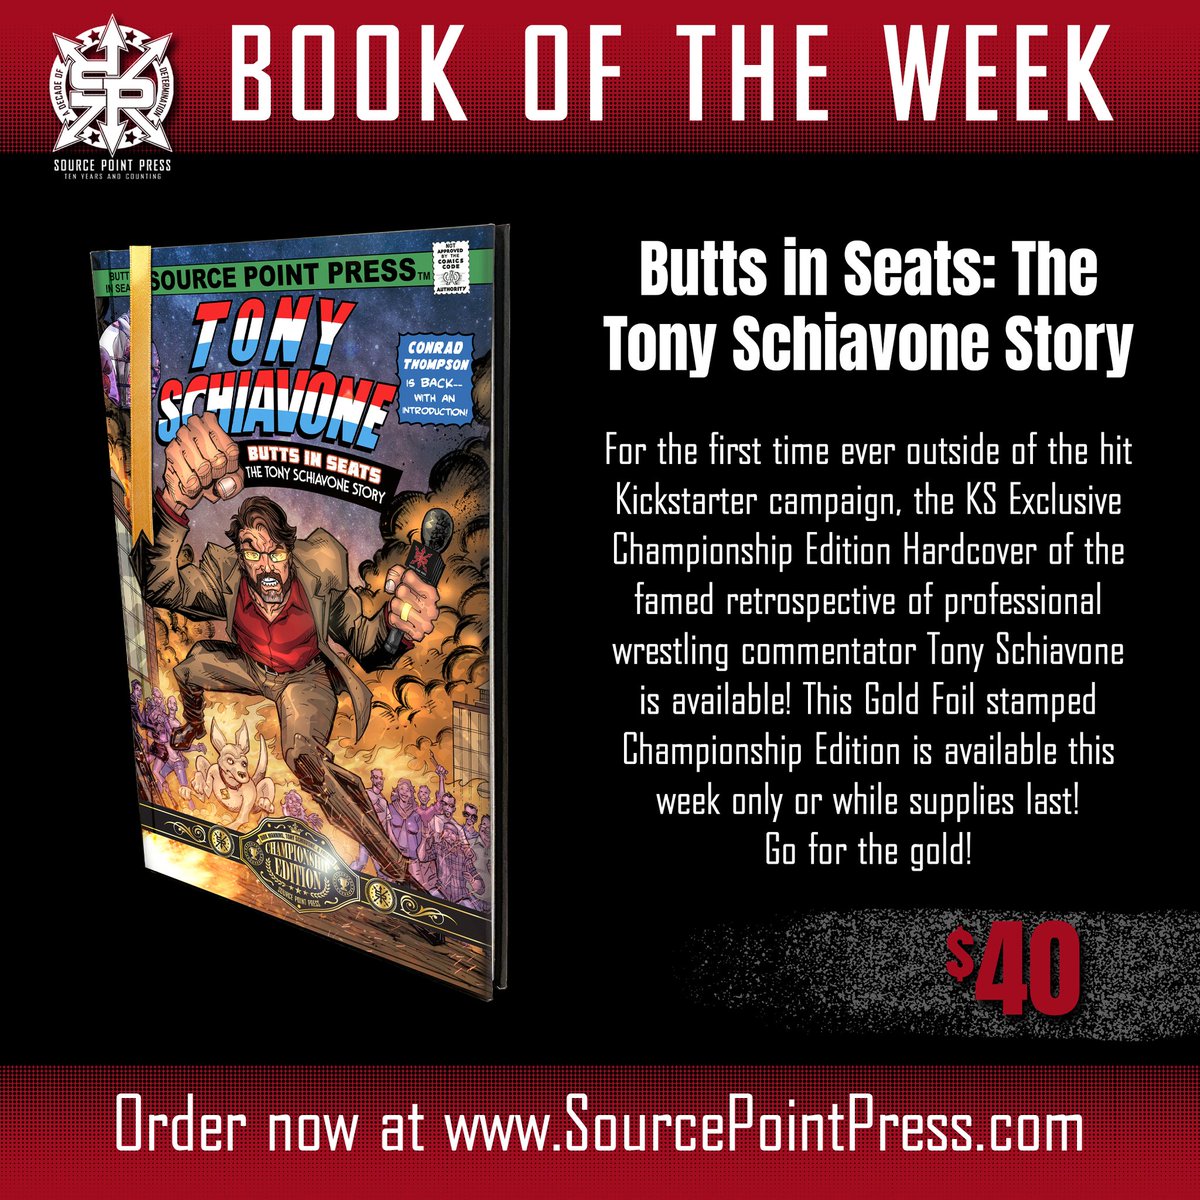 WHOA! @SourcePtPress found a few remaining copies of the limited edition hardcover of BUTTS IN SEATS: THE TONY SCHIAVONE STORY and that they've listed them for sale on the website! This book is TOTALLY OUT OF PRINT, so if you want one, get it now: sourcepointpress.com/products/butts…